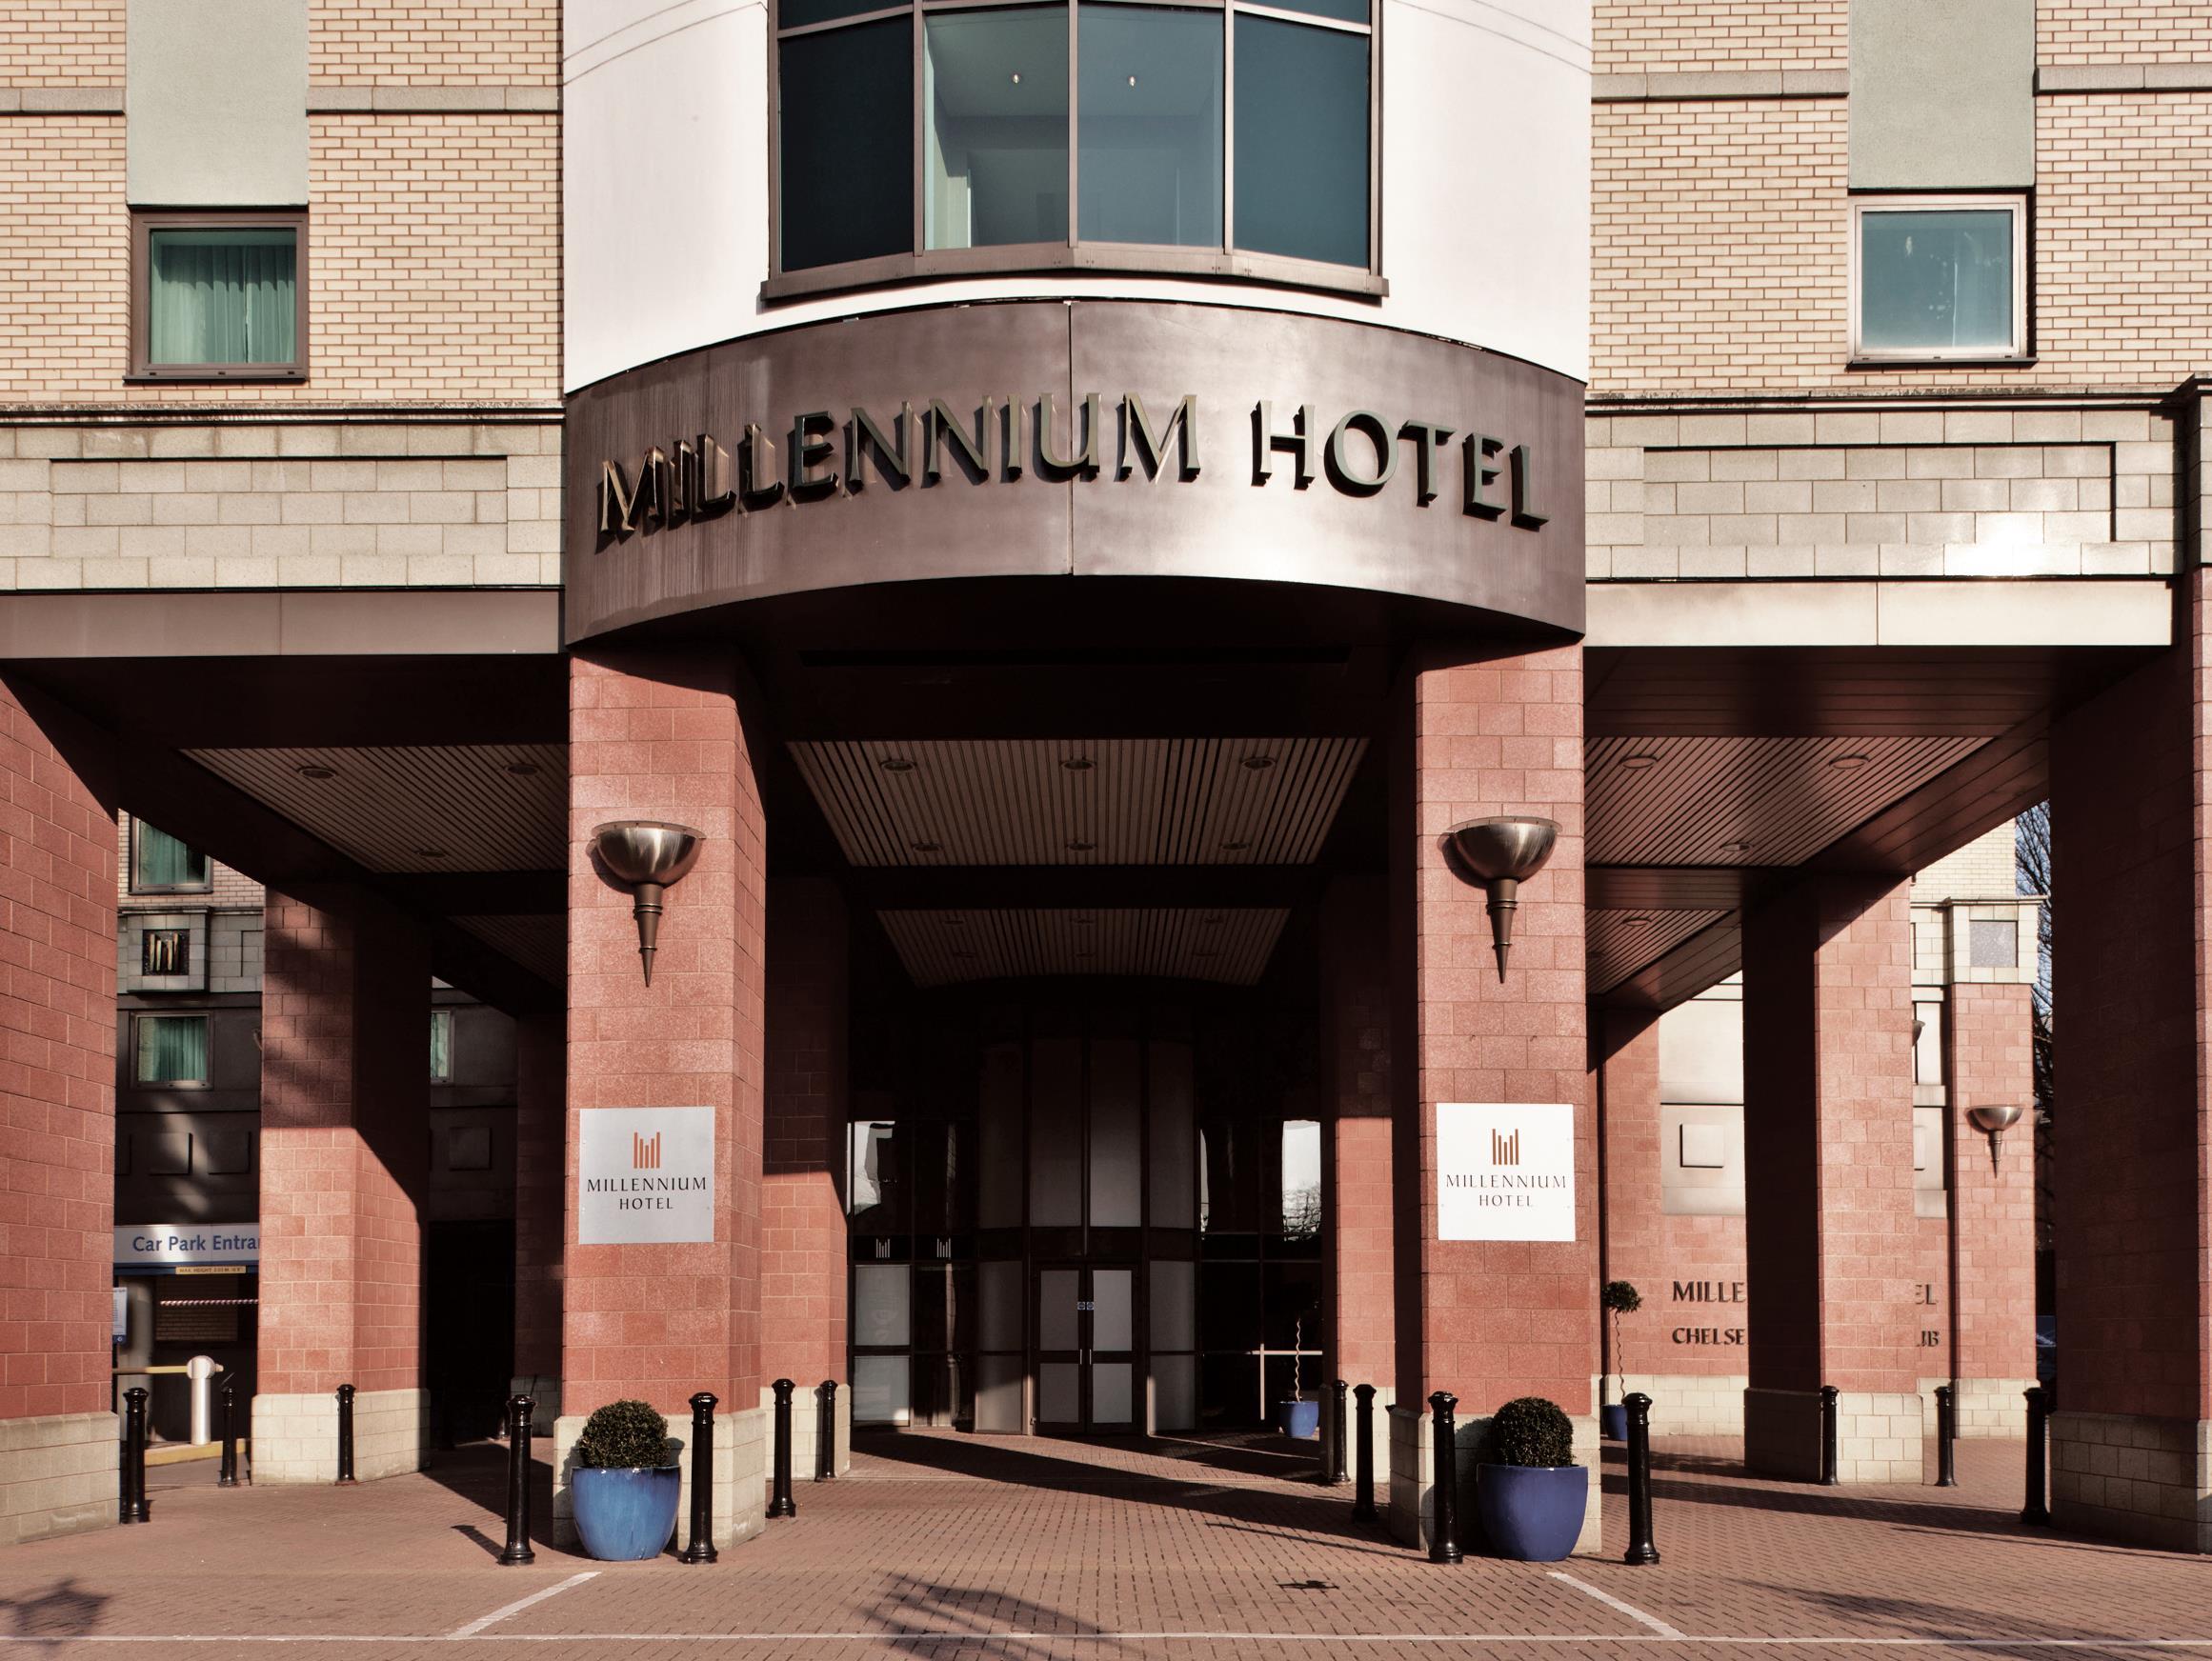 Millennium and Copthorne at Chelsea Football Club Hotel United Kingdom FAQ 2016, What facilities are there in Millennium and Copthorne at Chelsea Football Club Hotel United Kingdom 2016, What Languages Spoken are Supported in Millennium and Copthorne at Chelsea Football Club Hotel United Kingdom 2016, Which payment cards are accepted in Millennium and Copthorne at Chelsea Football Club Hotel United Kingdom , United Kingdom Millennium and Copthorne at Chelsea Football Club Hotel room facilities and services Q&A 2016, United Kingdom Millennium and Copthorne at Chelsea Football Club Hotel online booking services 2016, United Kingdom Millennium and Copthorne at Chelsea Football Club Hotel address 2016, United Kingdom Millennium and Copthorne at Chelsea Football Club Hotel telephone number 2016,United Kingdom Millennium and Copthorne at Chelsea Football Club Hotel map 2016, United Kingdom Millennium and Copthorne at Chelsea Football Club Hotel traffic guide 2016, how to go United Kingdom Millennium and Copthorne at Chelsea Football Club Hotel, United Kingdom Millennium and Copthorne at Chelsea Football Club Hotel booking online 2016, United Kingdom Millennium and Copthorne at Chelsea Football Club Hotel room types 2016.